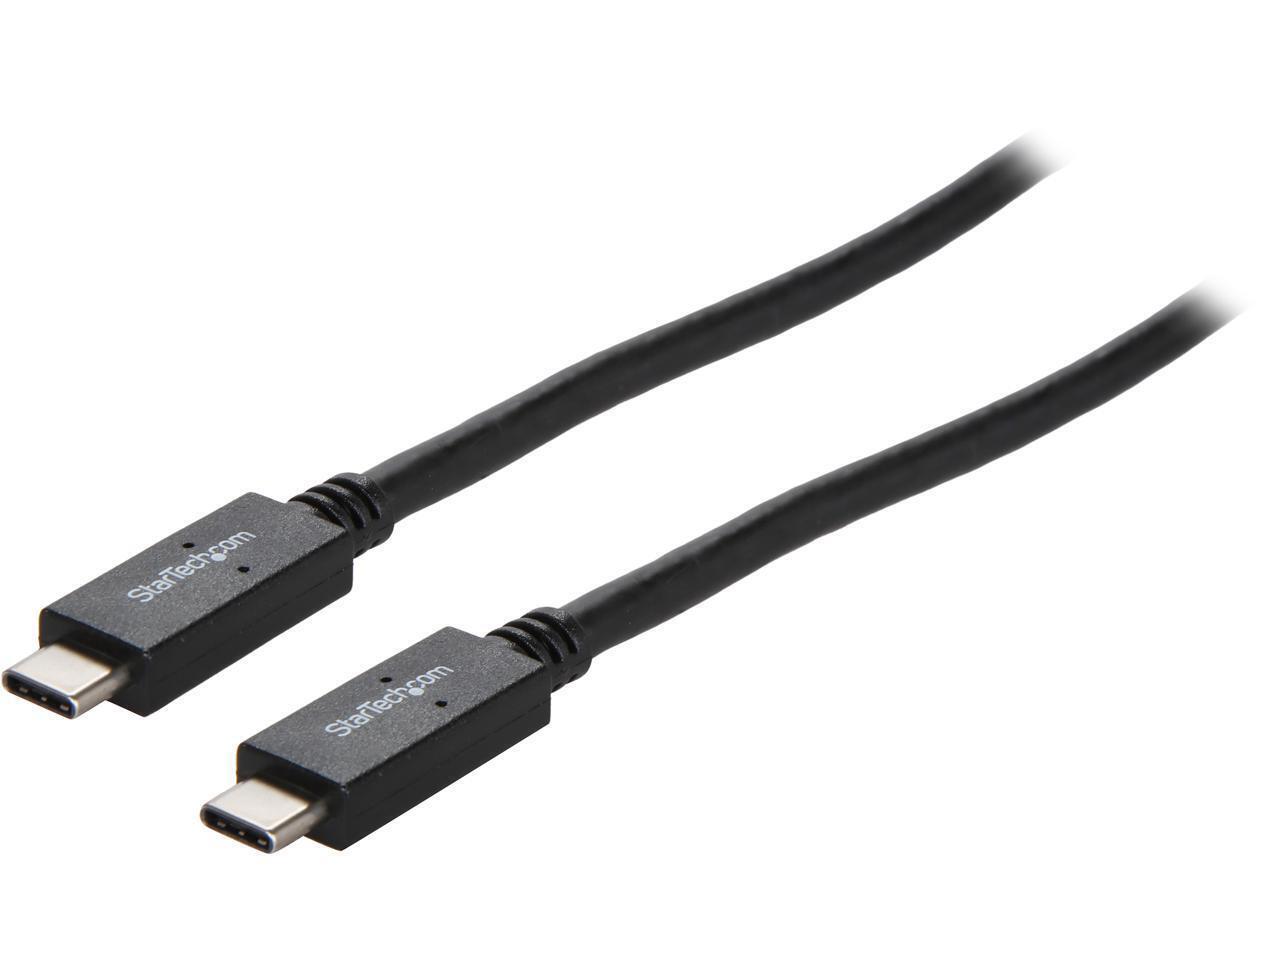 StarTech.com USB31C5C1M Black USB-C Cable with Power Delivery (5A) - USB 3.1 (10